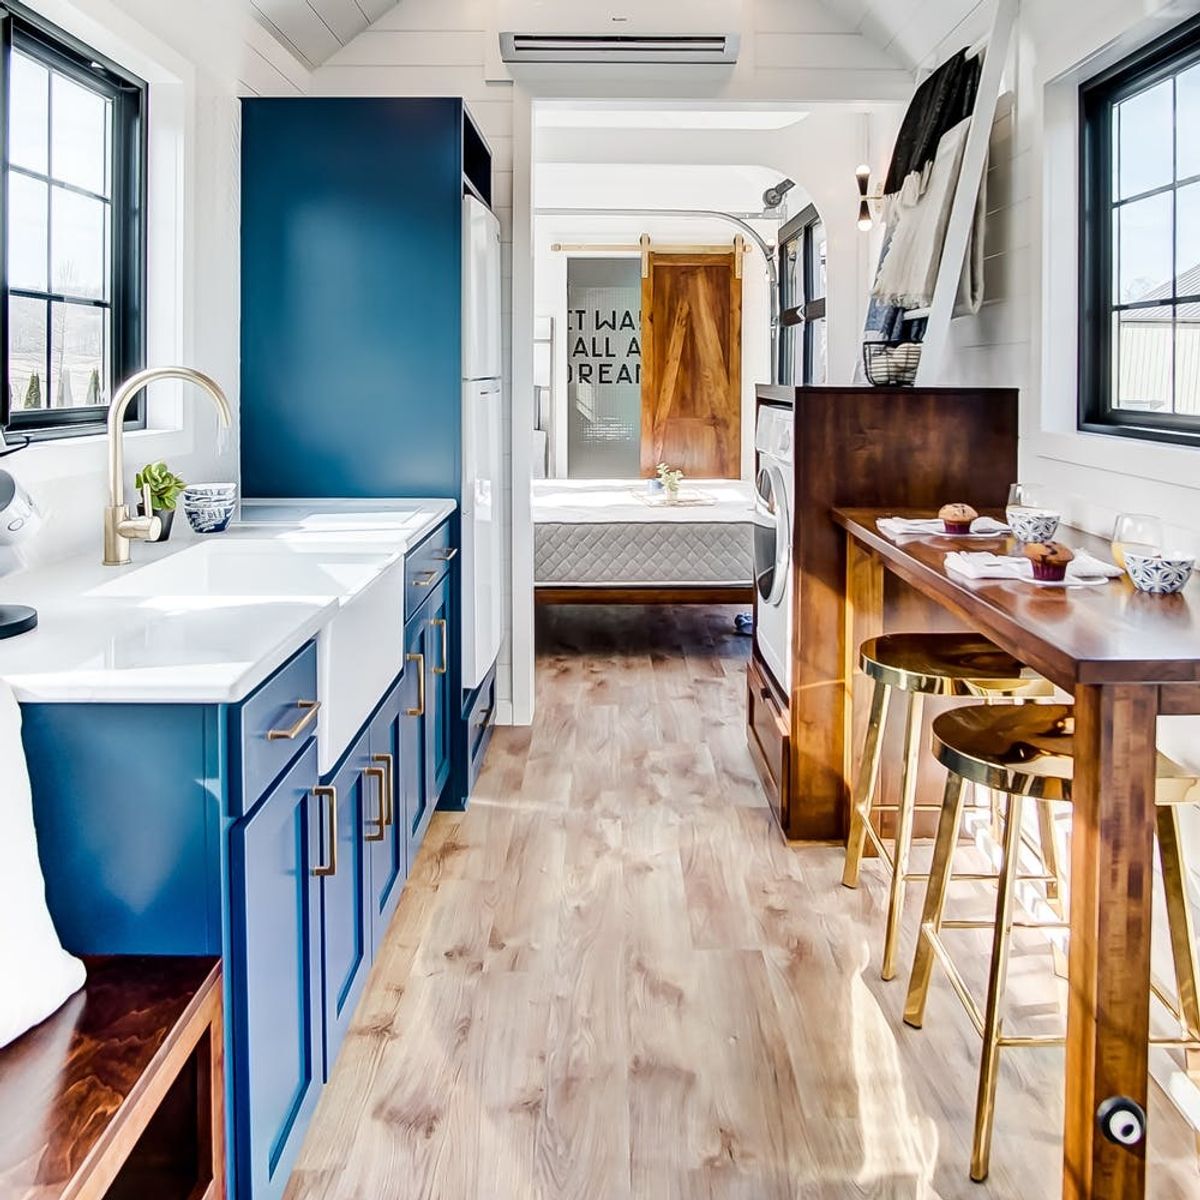 We’re Stealing So Many Design Tips from This Adorable Tiny House